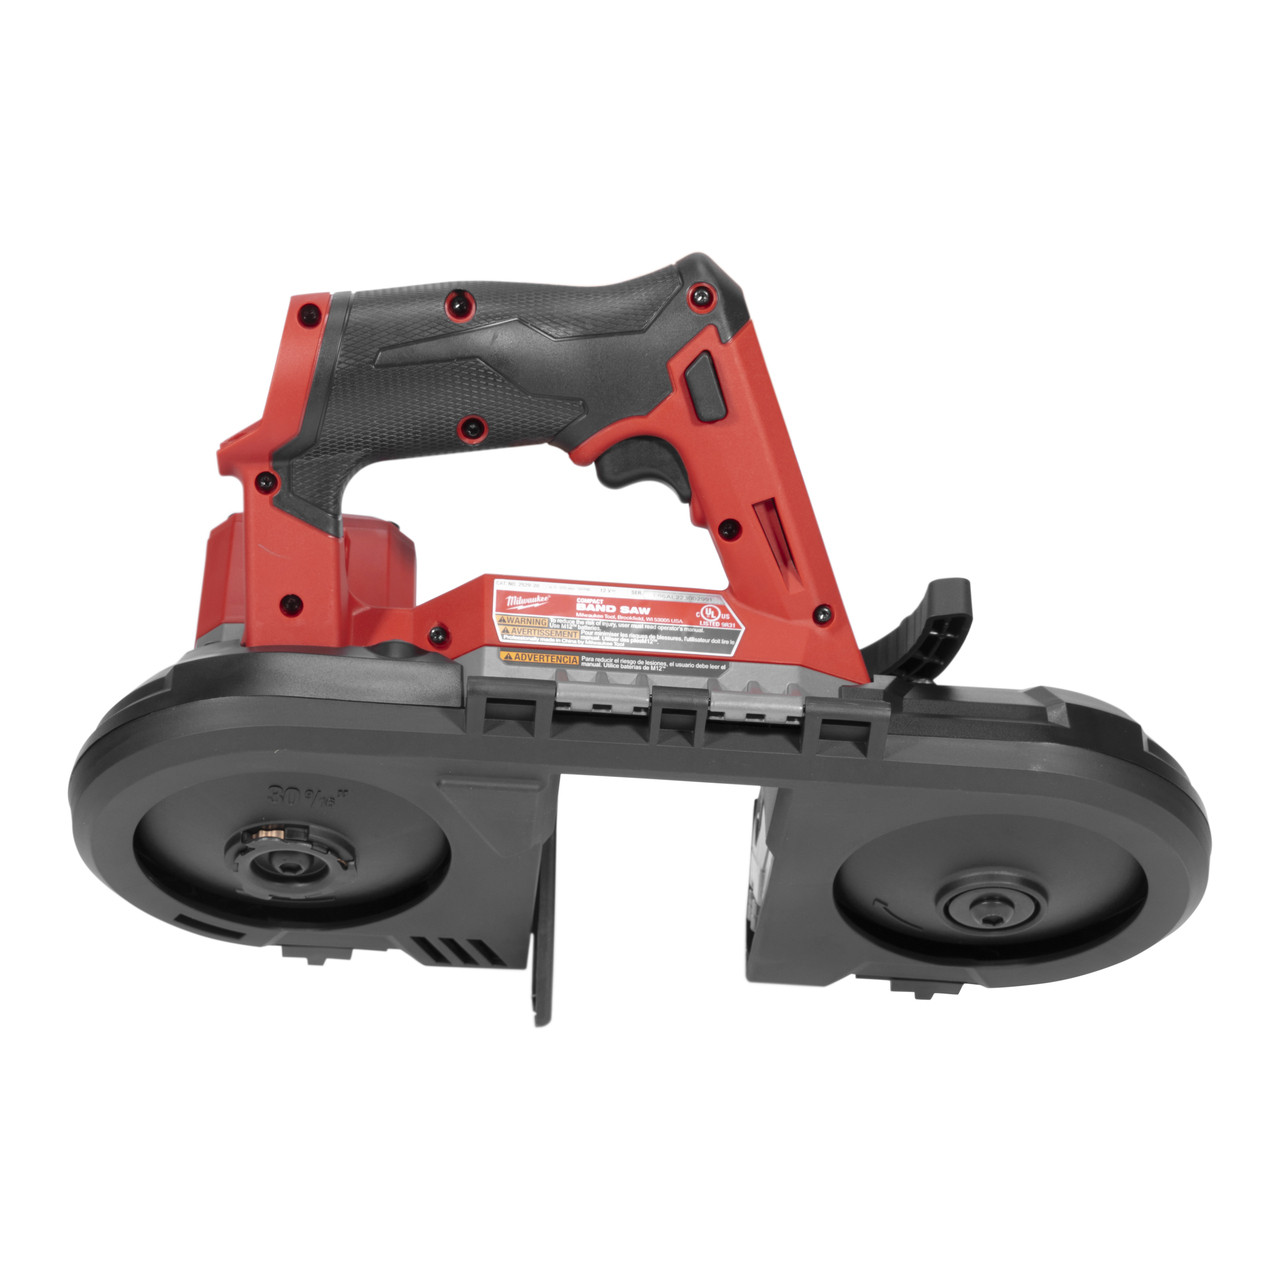 Milwaukee M12 FUEL Band Saw 12V Compact Integrated Blade And REDLINK  (2529-20)